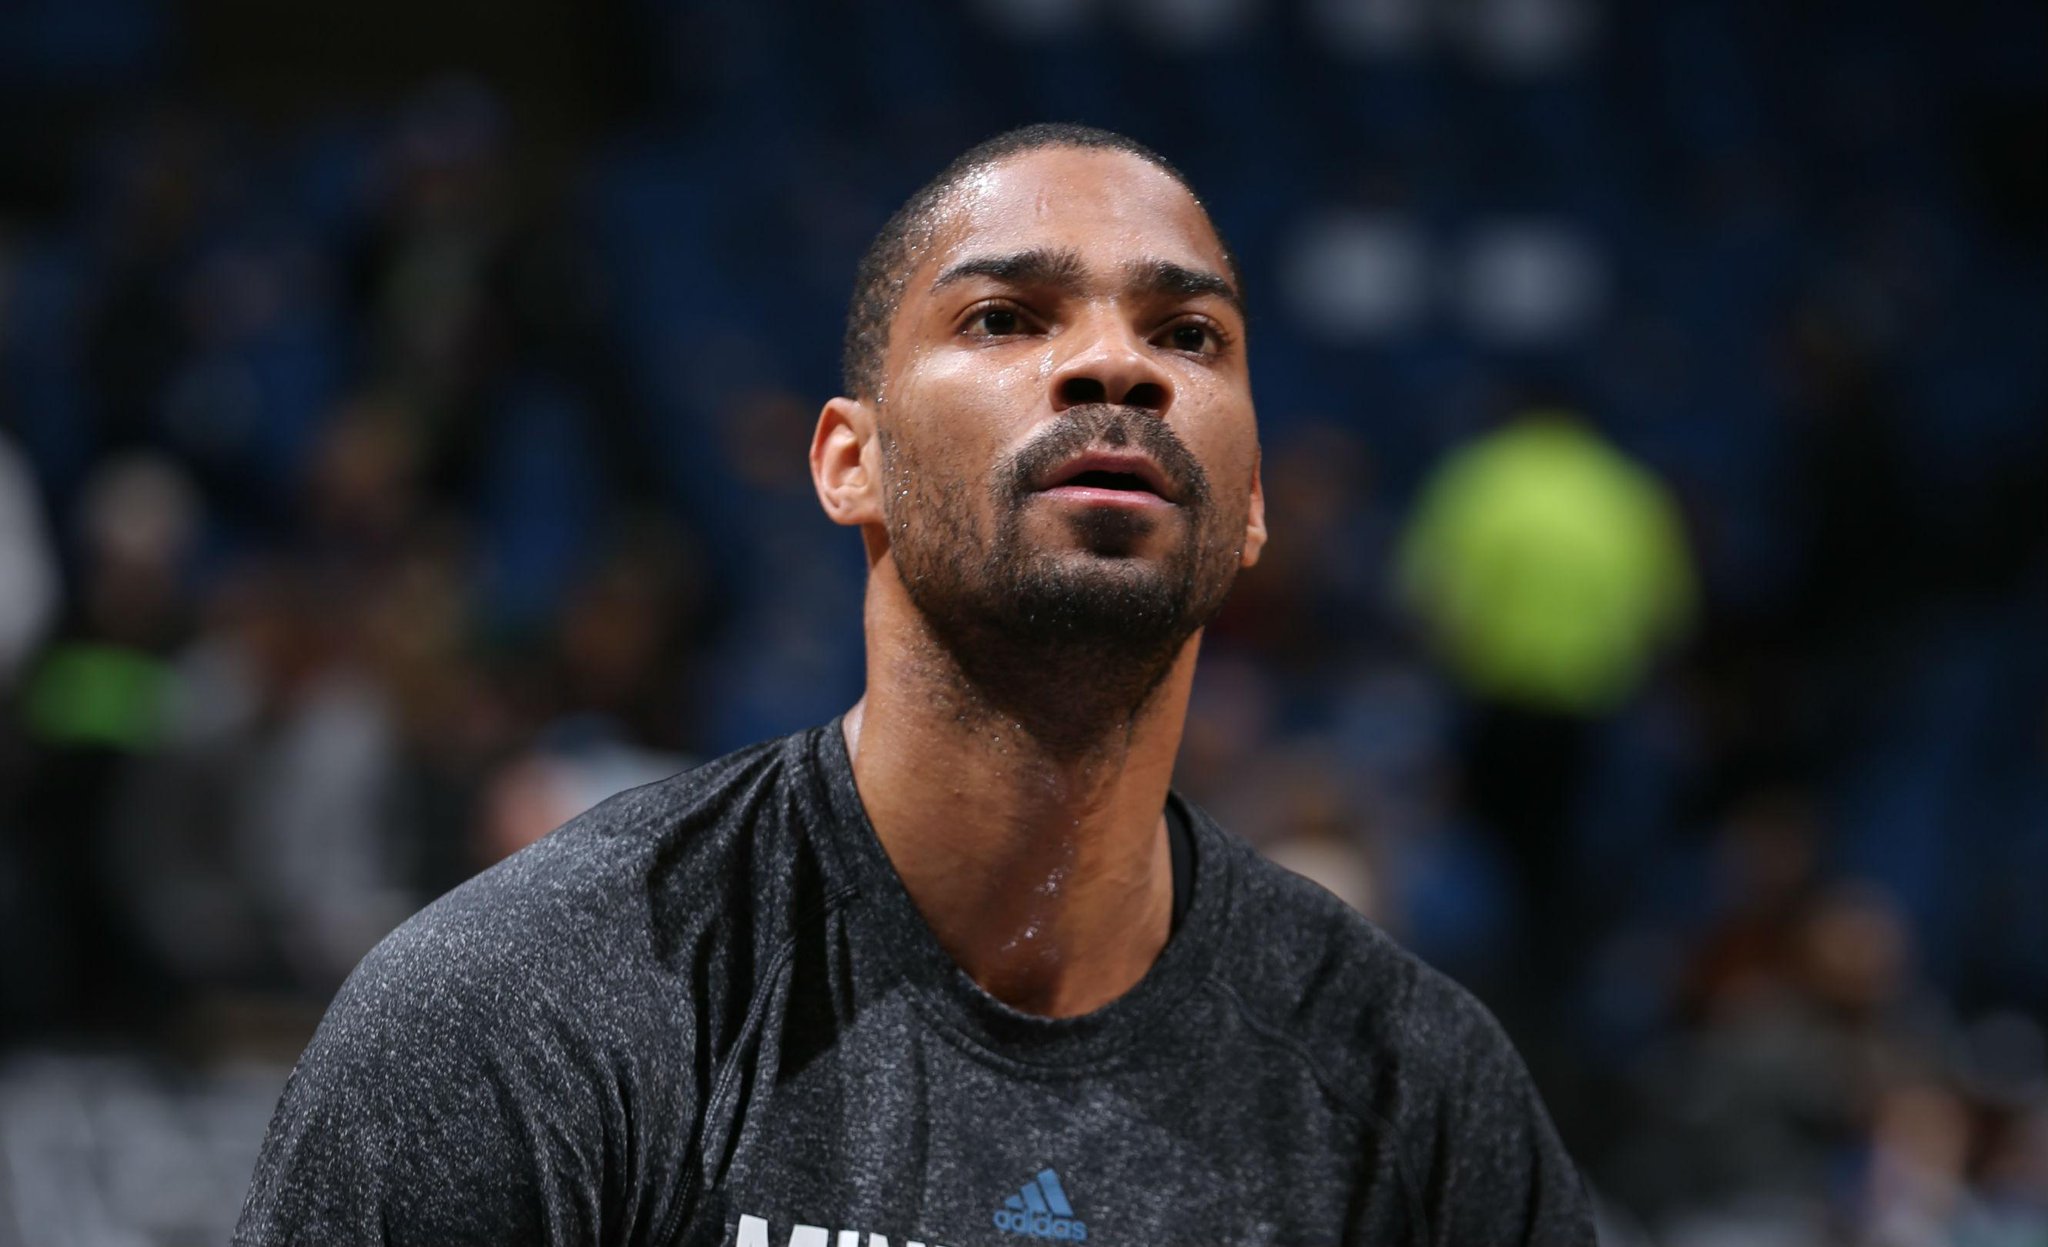  fans, and welcome newcomer Gary Neal a happy birthday! 